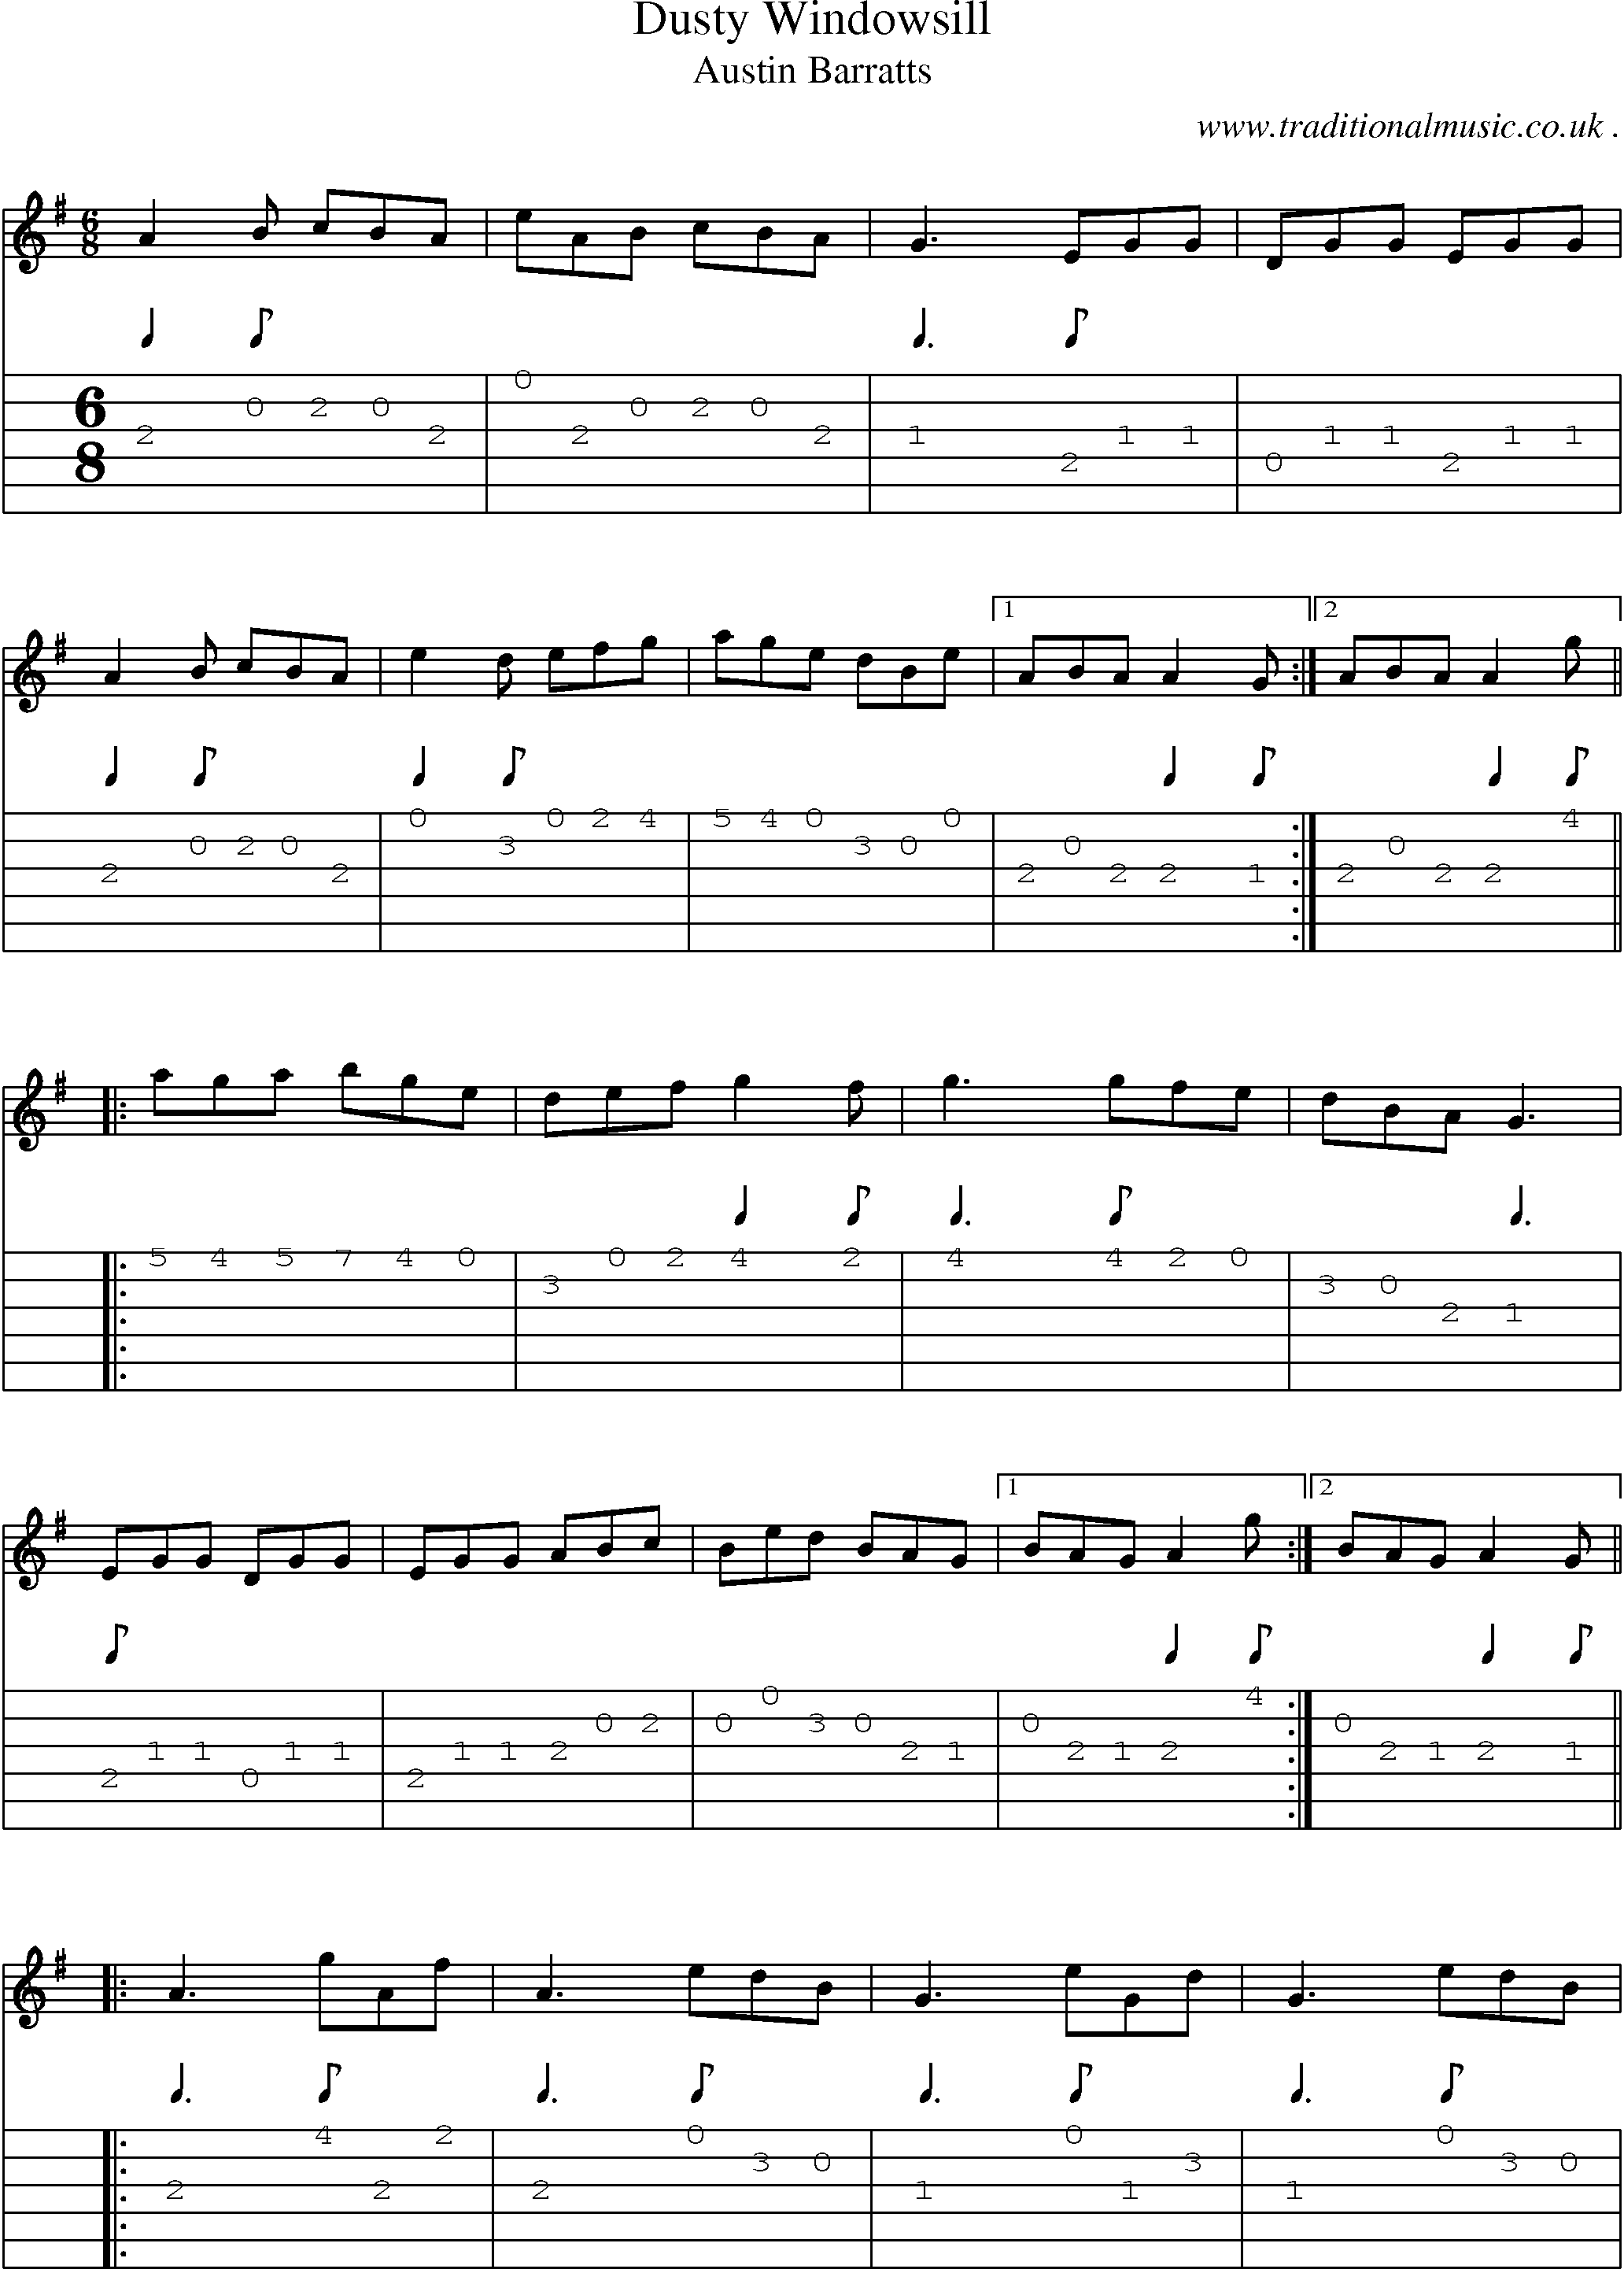 Sheet-Music and Guitar Tabs for Dusty Windowsill